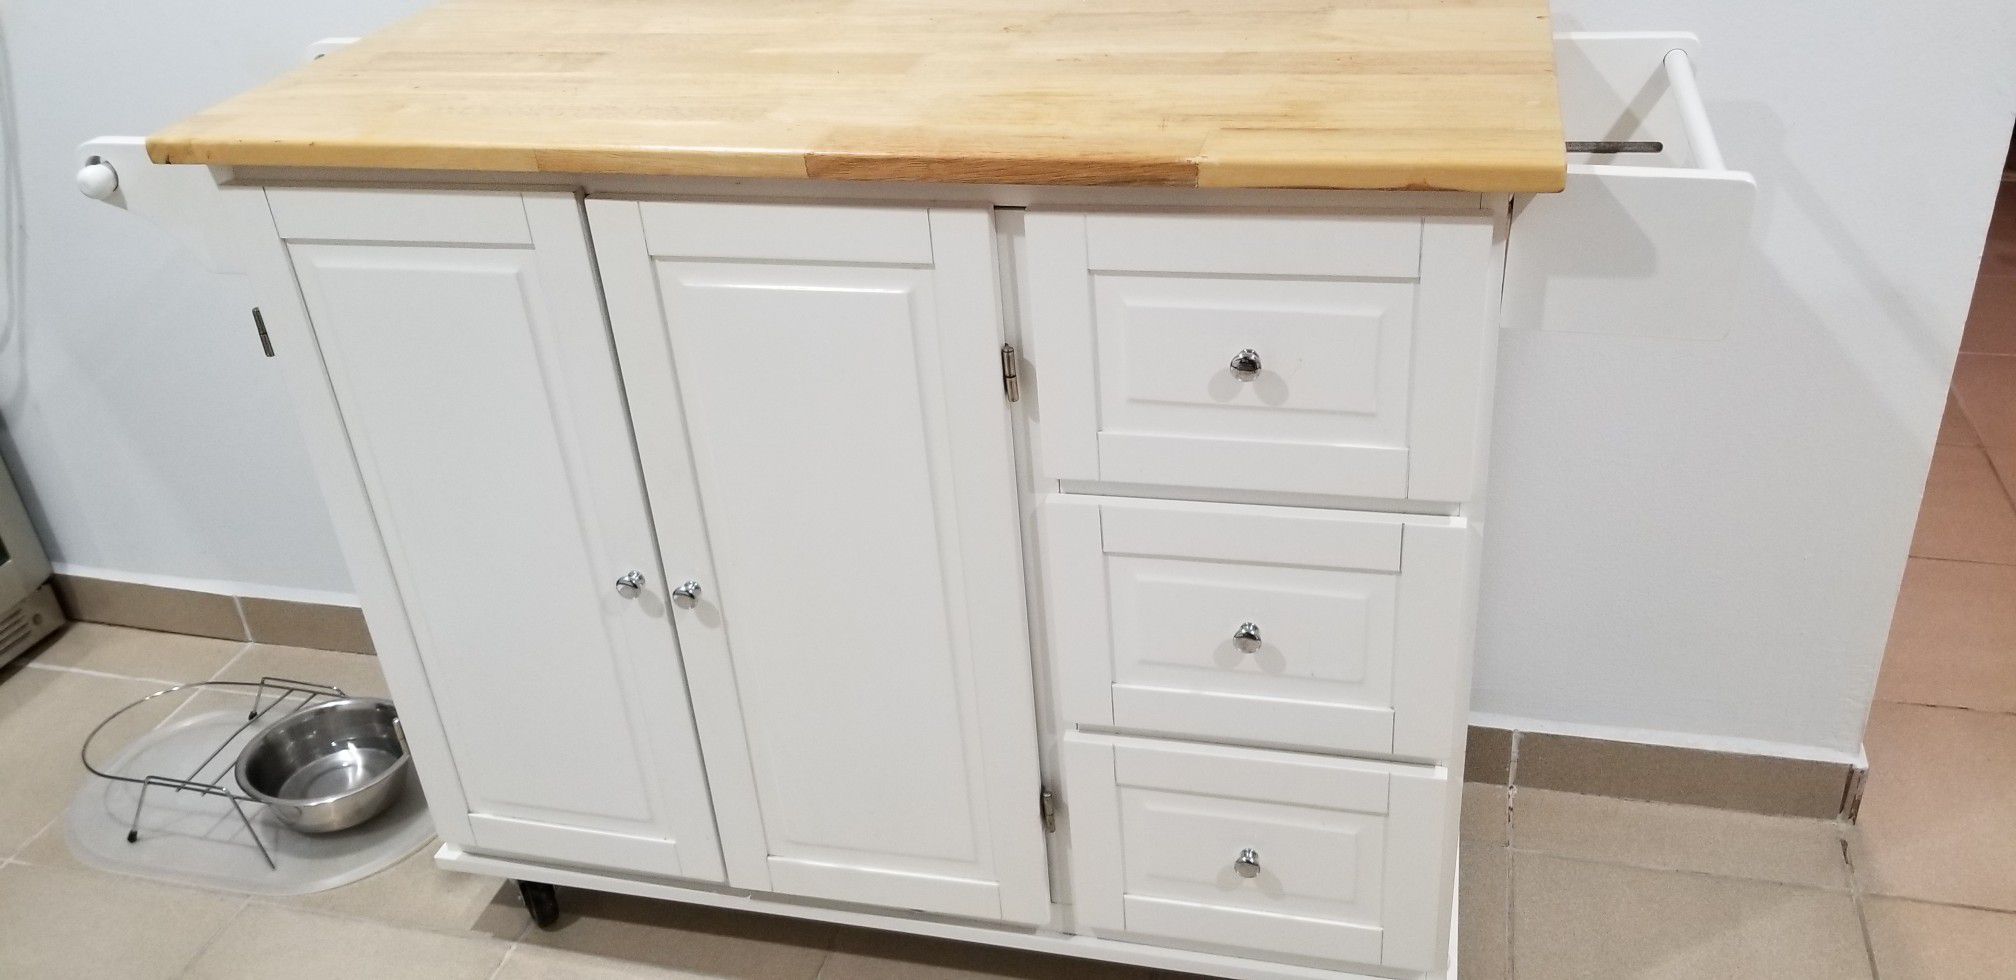 Kitchen cabinet/table